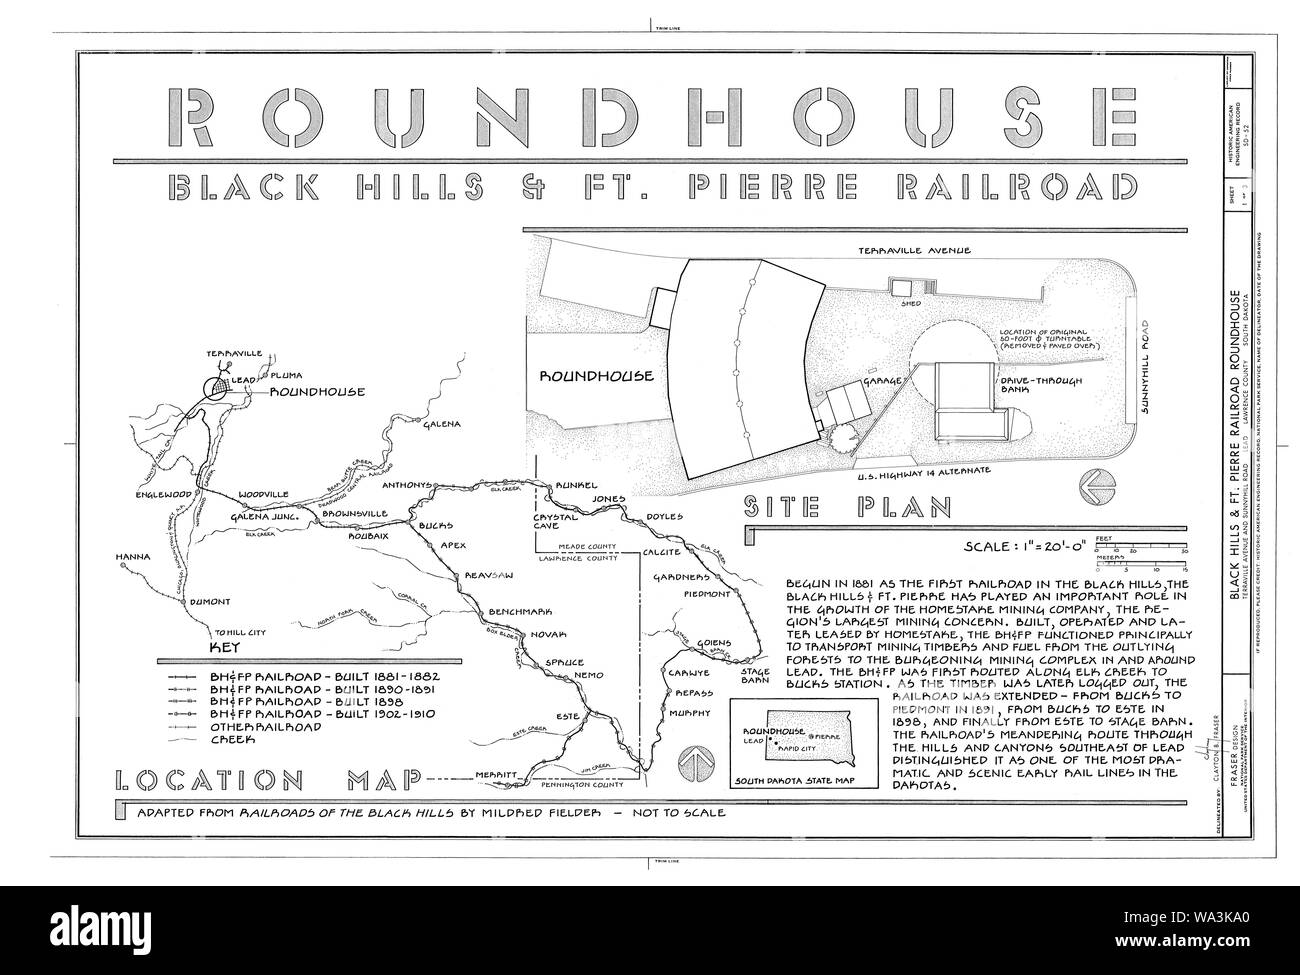 Black Hills and Fort Pierre Railroad Roundhouse, Terraville Avenue and Sunnyhill Road, Lead, Lawrence County, SD HAER SD-52 (sheet 1 of 3) Stock Photo